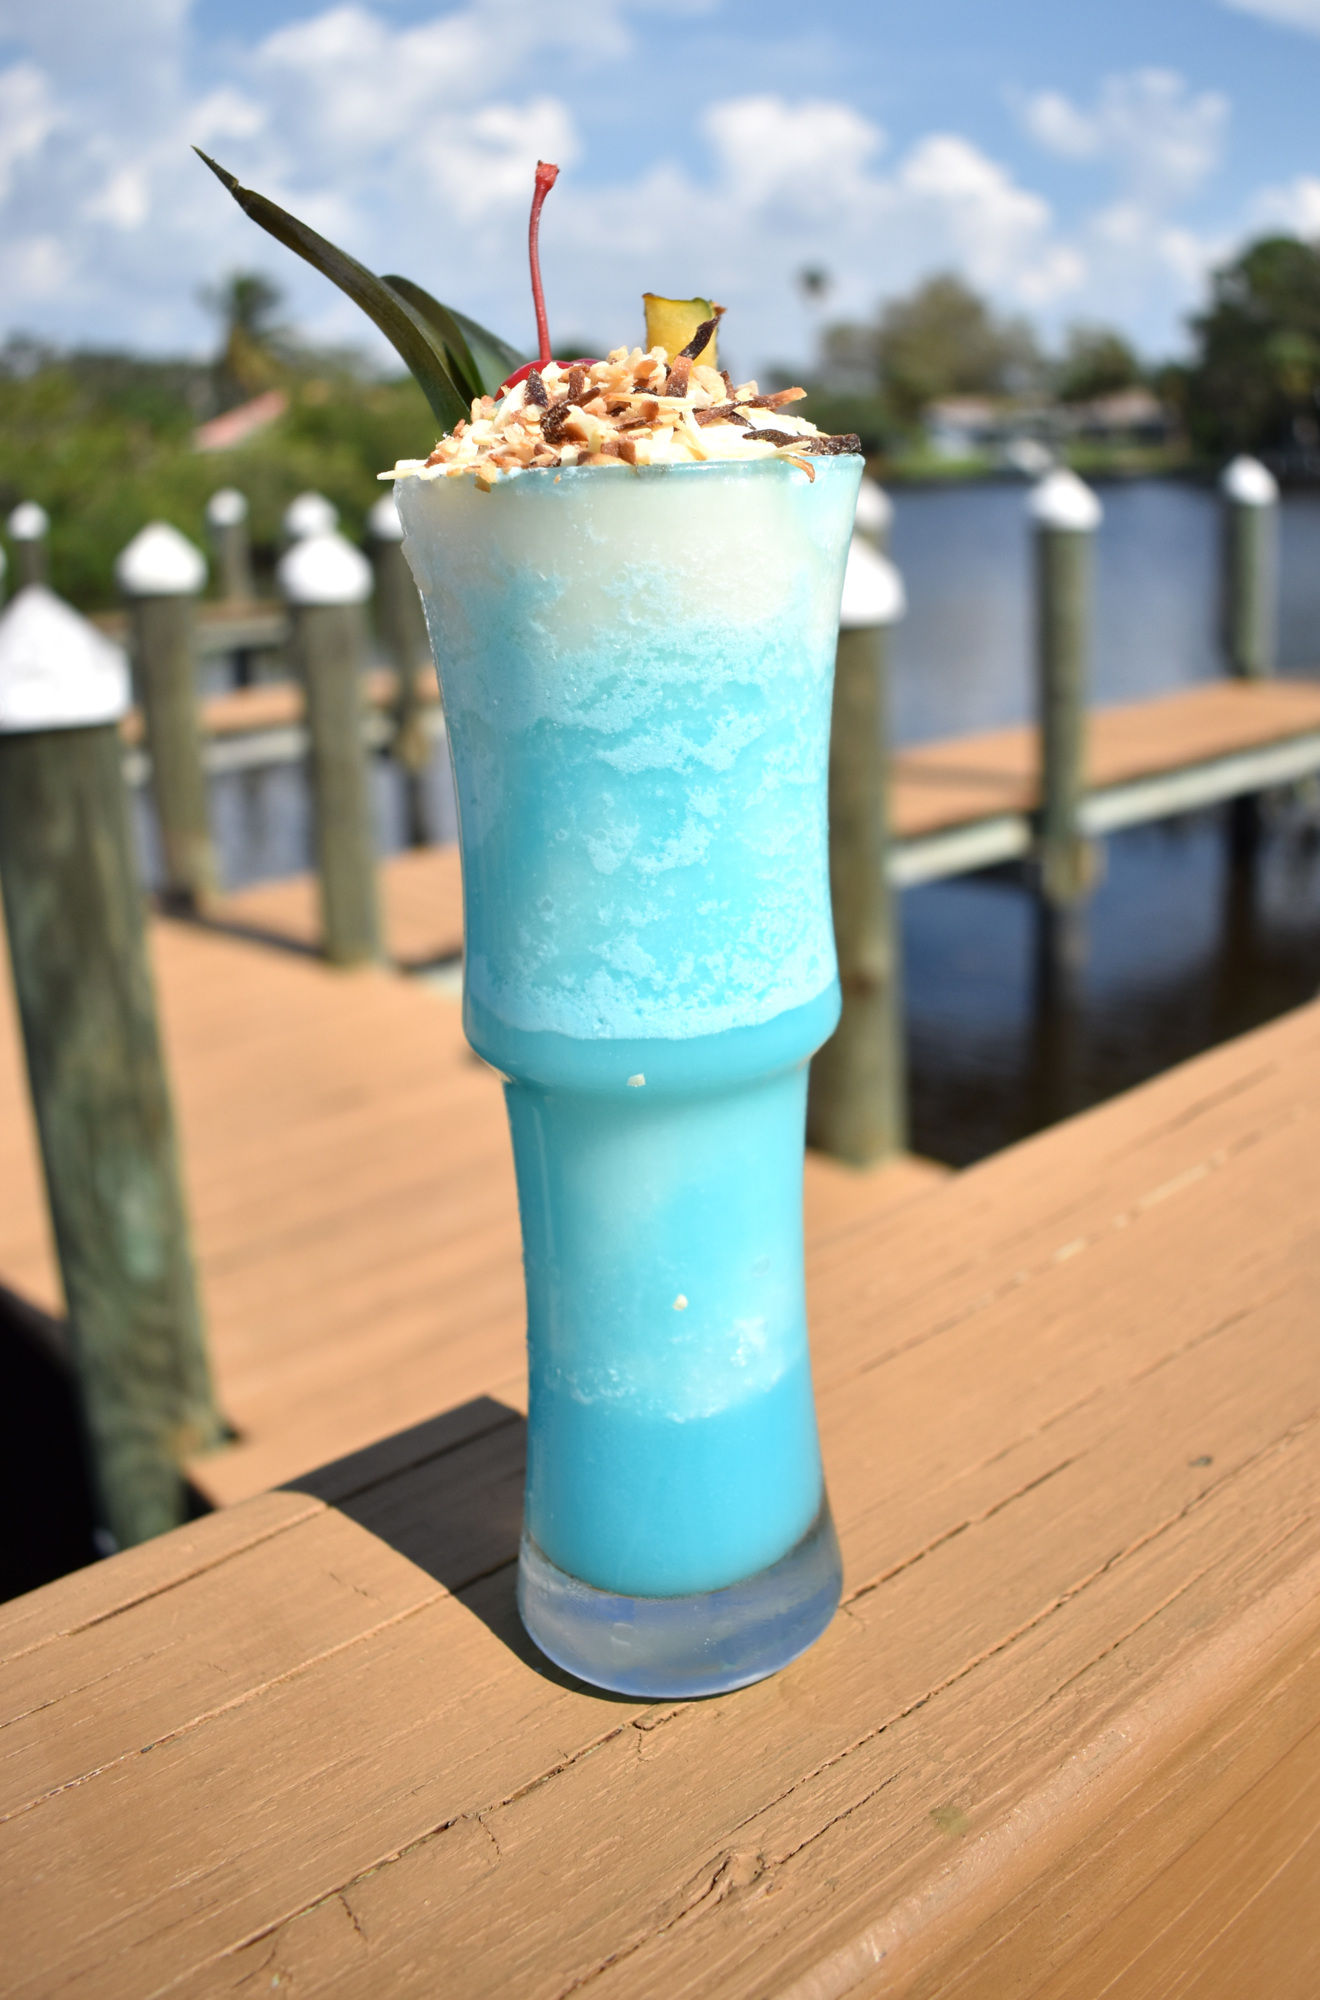 The Caribbean Coolada is one of the most frequently ordered drinks at Phillippi Creek Village Restaurant & Oyster Bar. Photo by Niki Kottmann